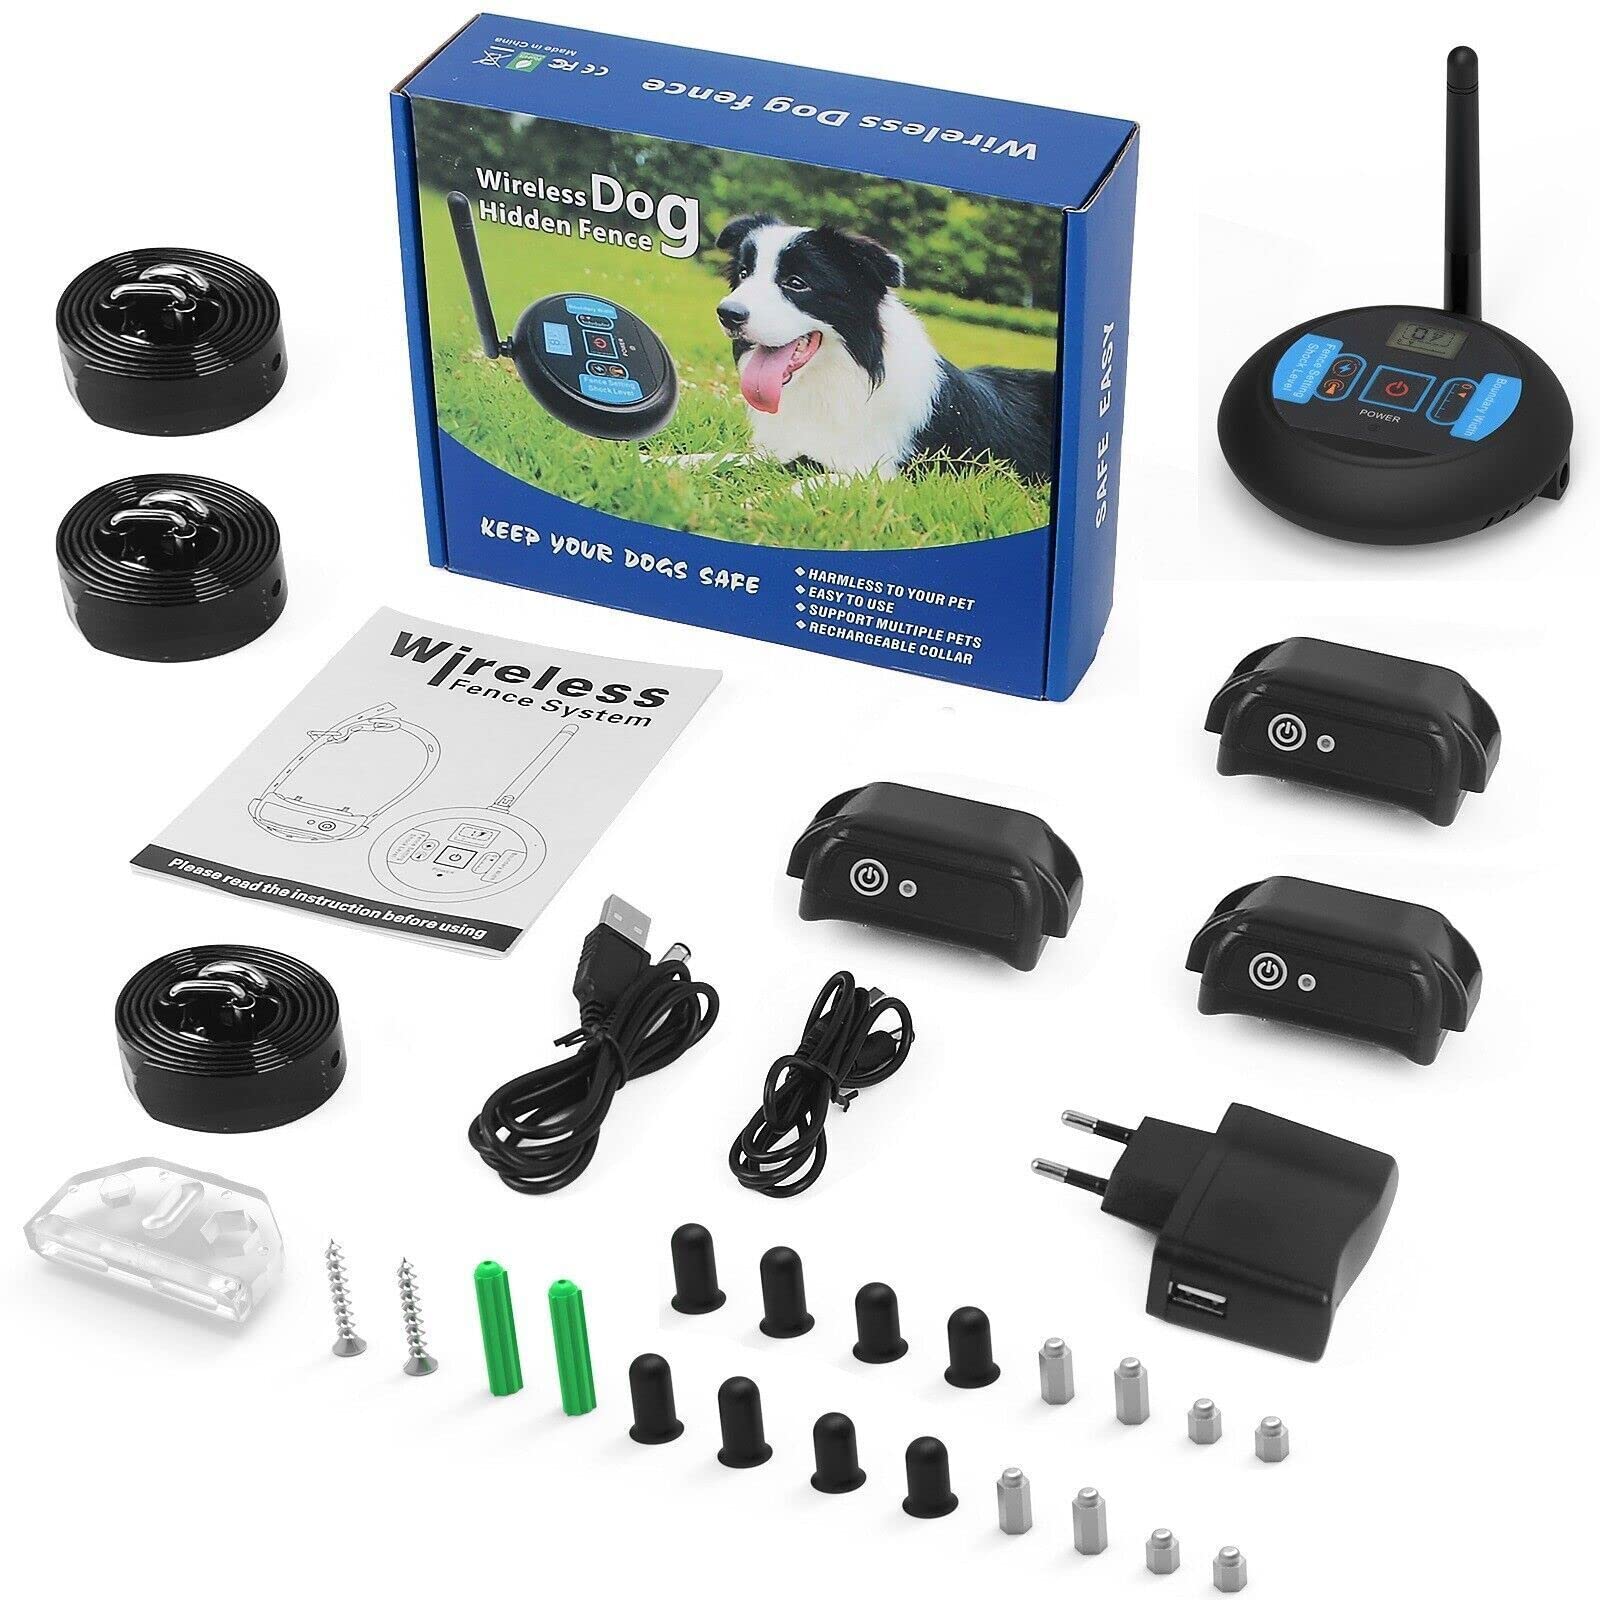 HEXIEDEN Wireless Electric Dog Fence,Pet Safe Rechargeable Waterproof Collar with Static Containment System,Adjustable Signal Range,Container Boundary for Small Medium Large Dog,for3dogs